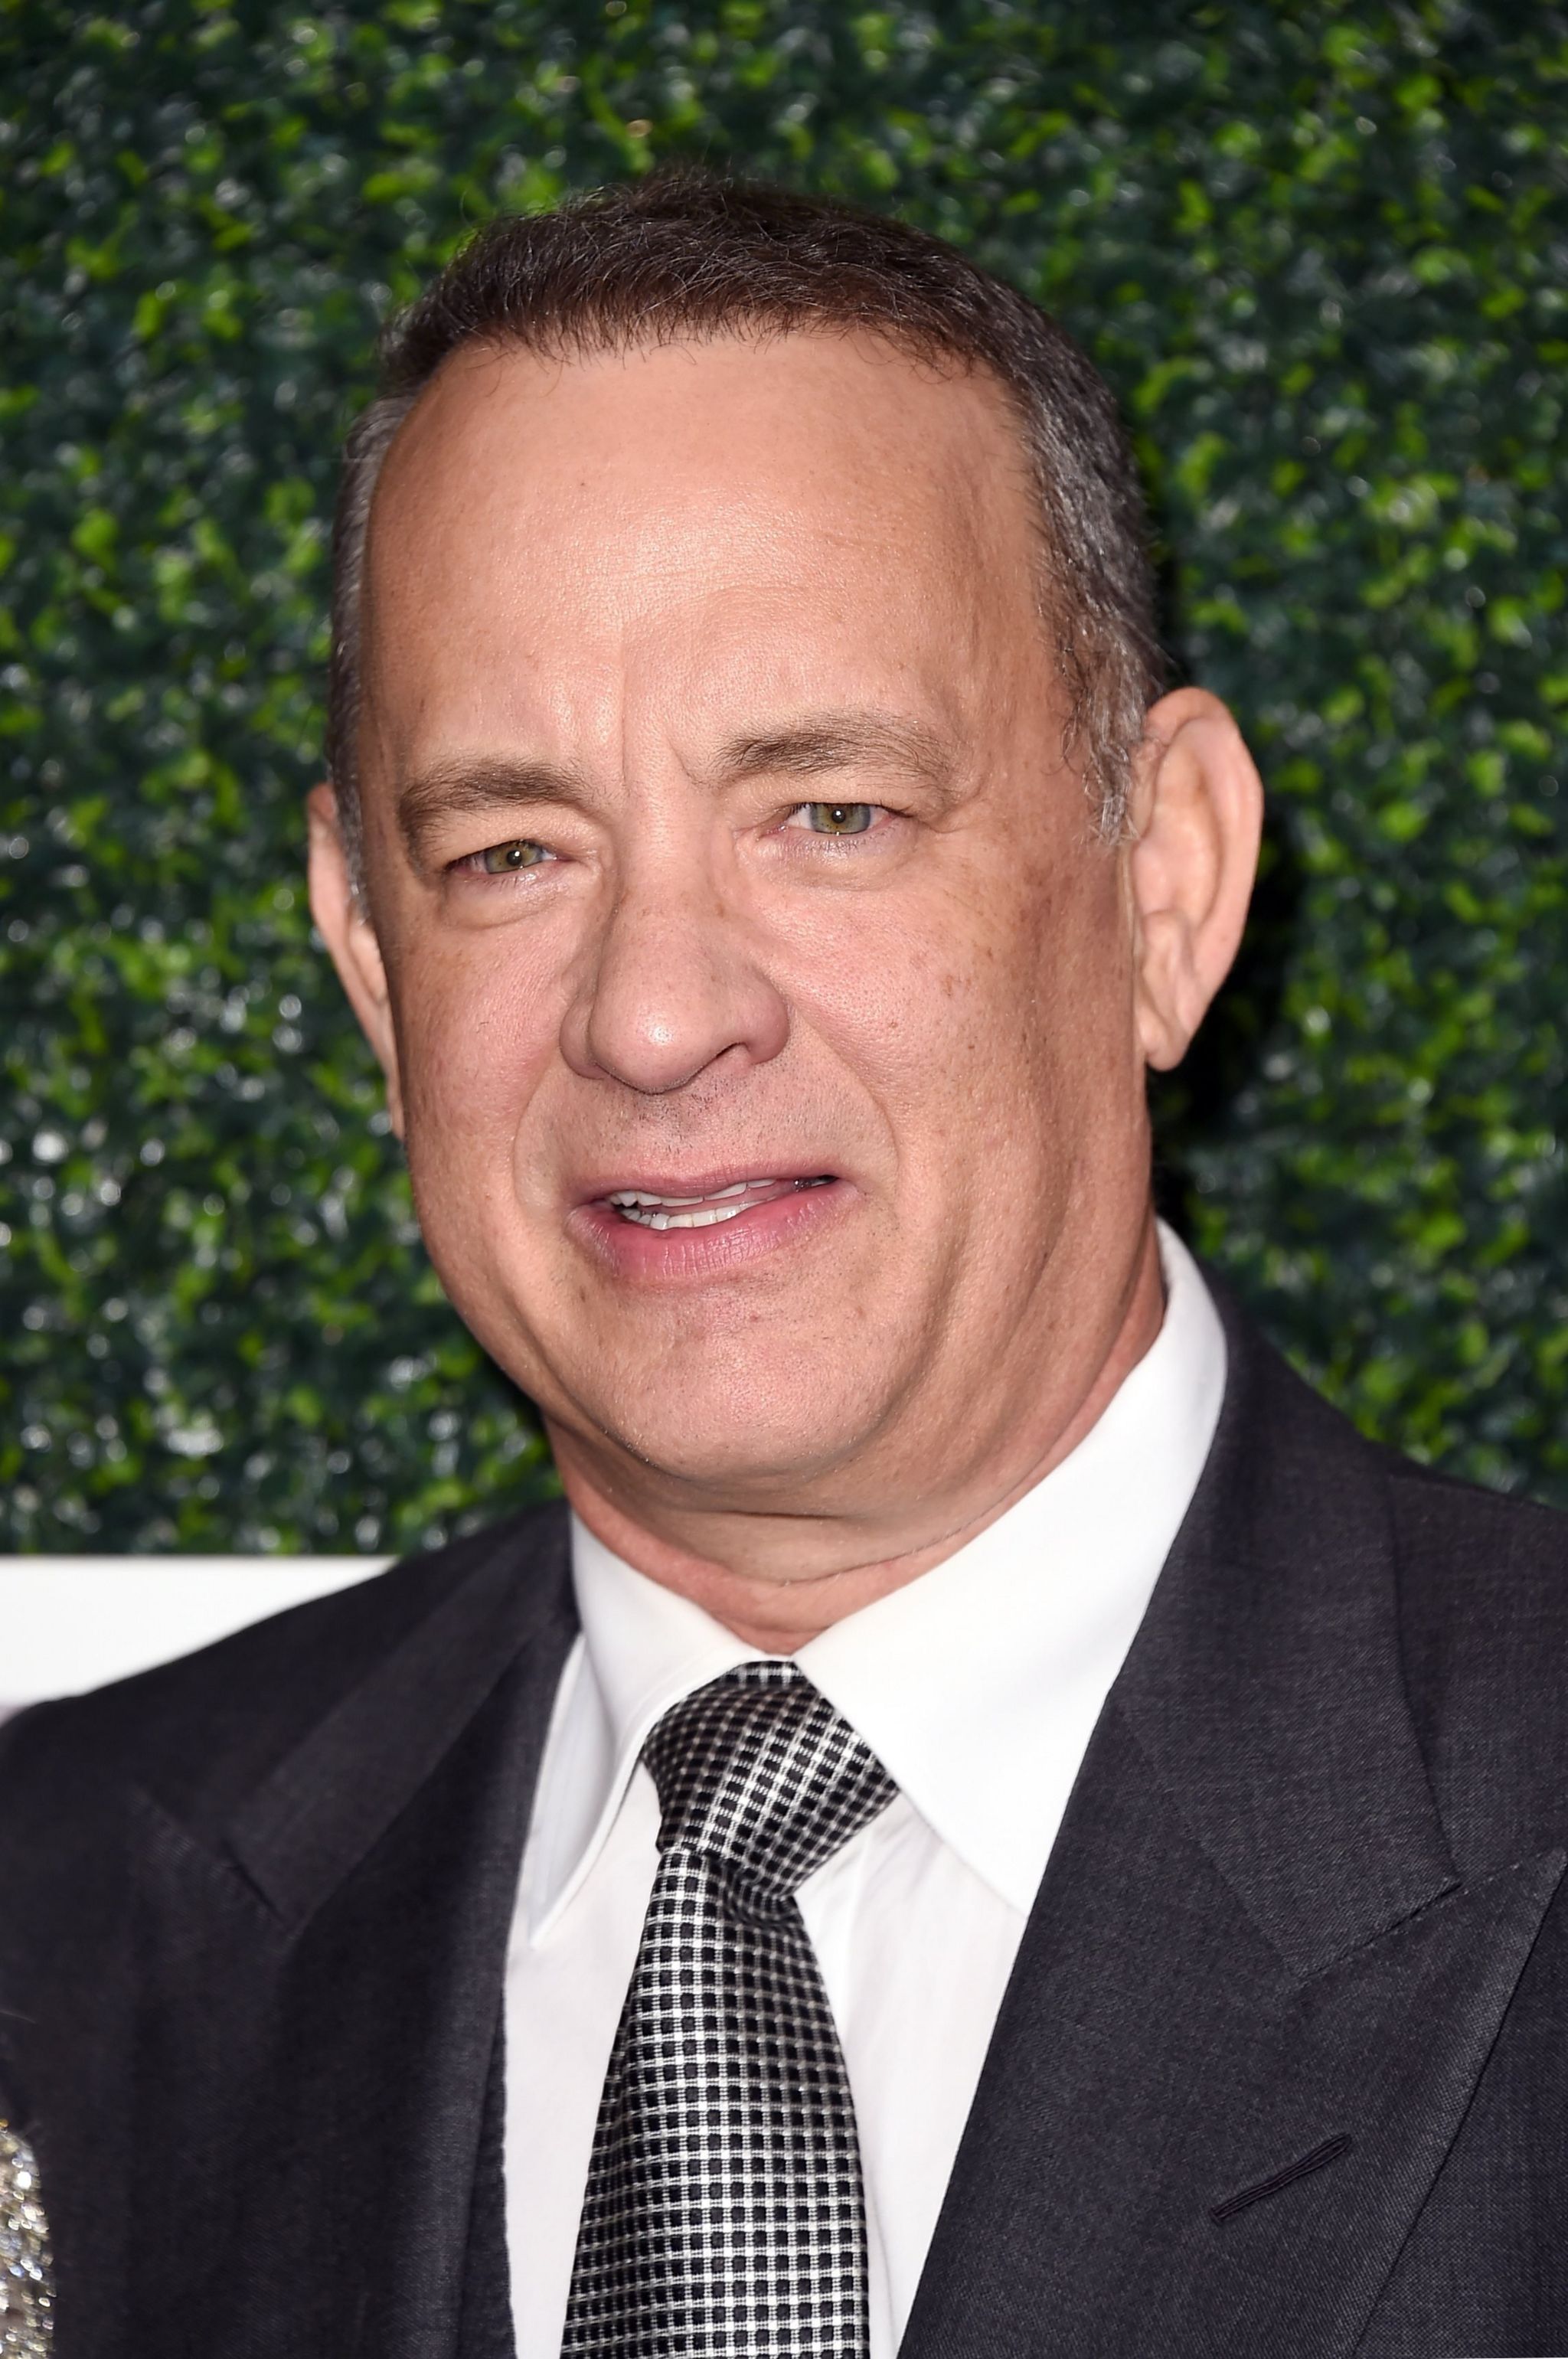 Honorary Co-Chair Tom Hanks attends WCRF"s "An Unforgettable Evening" presented by Saks Fifth Avenue at the Beverly Wilshire Four Seasons Hotel on February 16, 2017 in Beverly Hills, California.